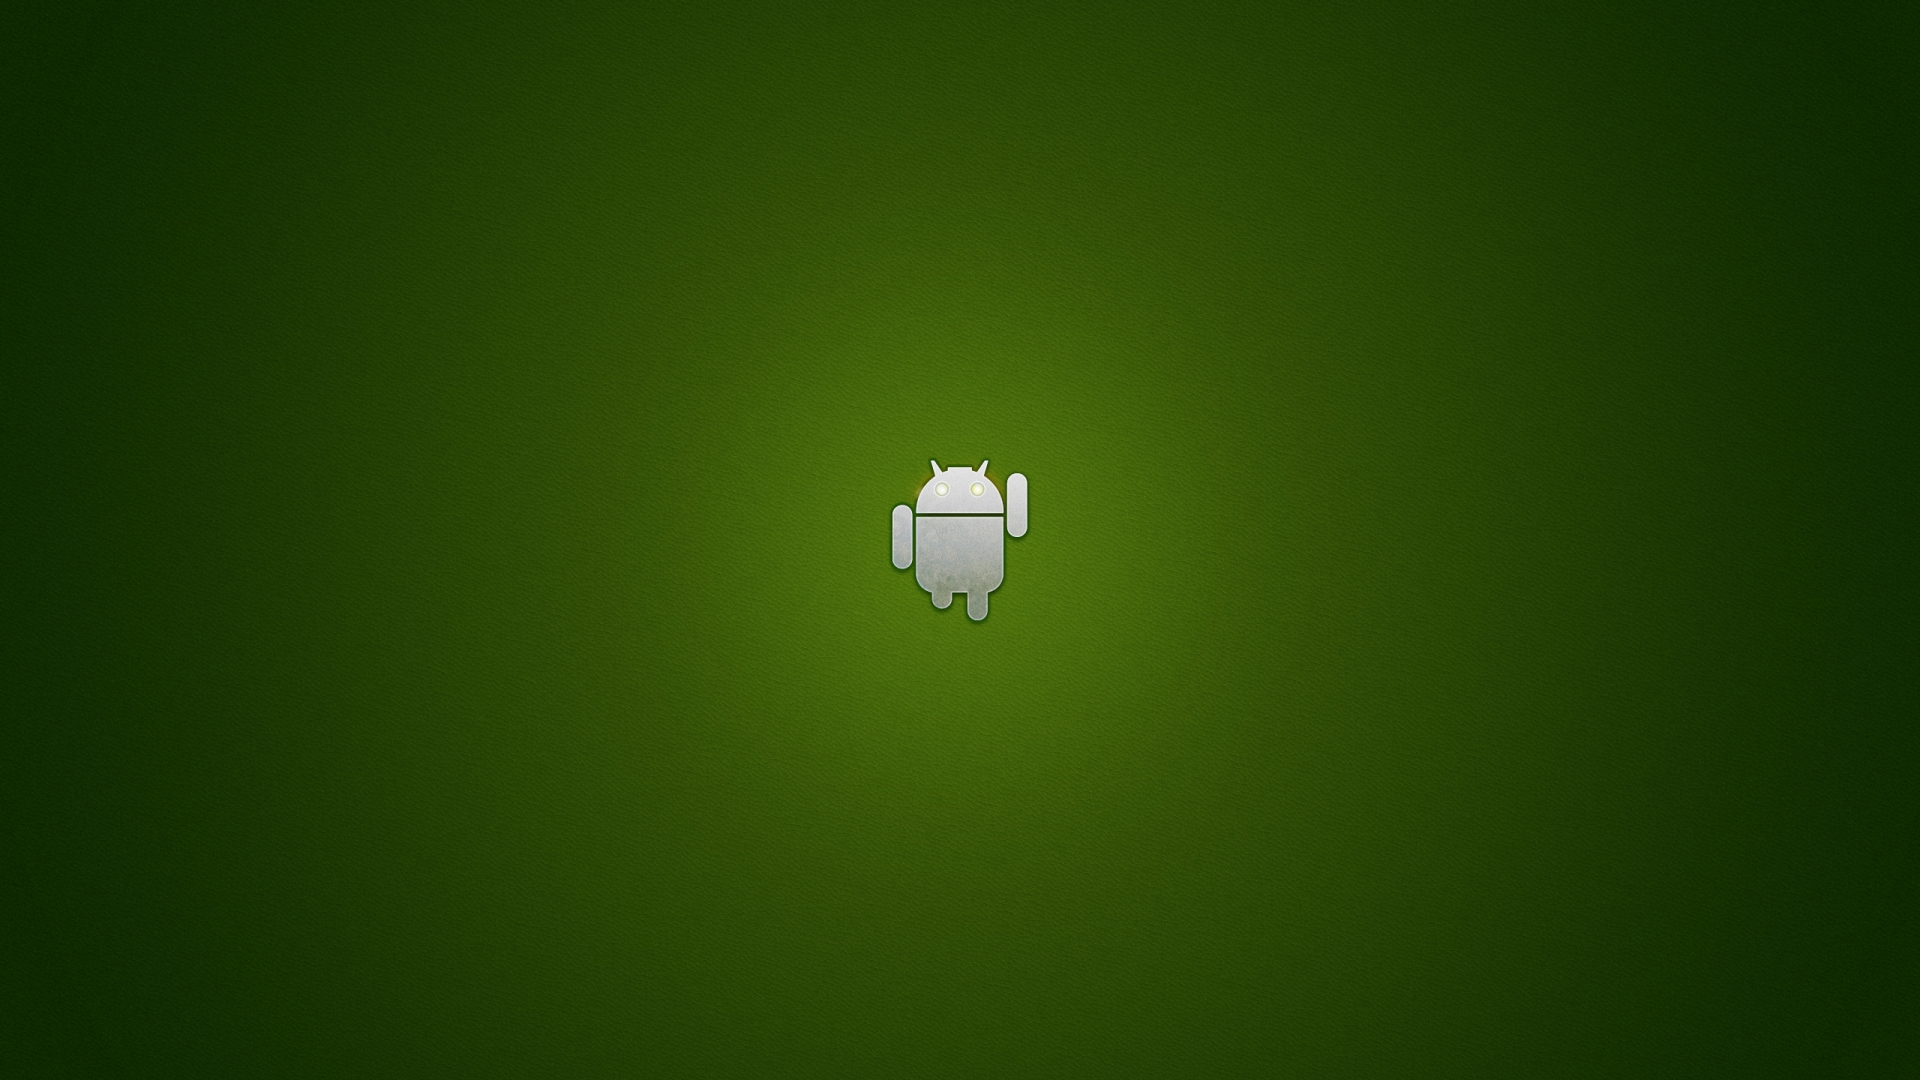 Just Android for 1920 x 1080 HDTV 1080p resolution